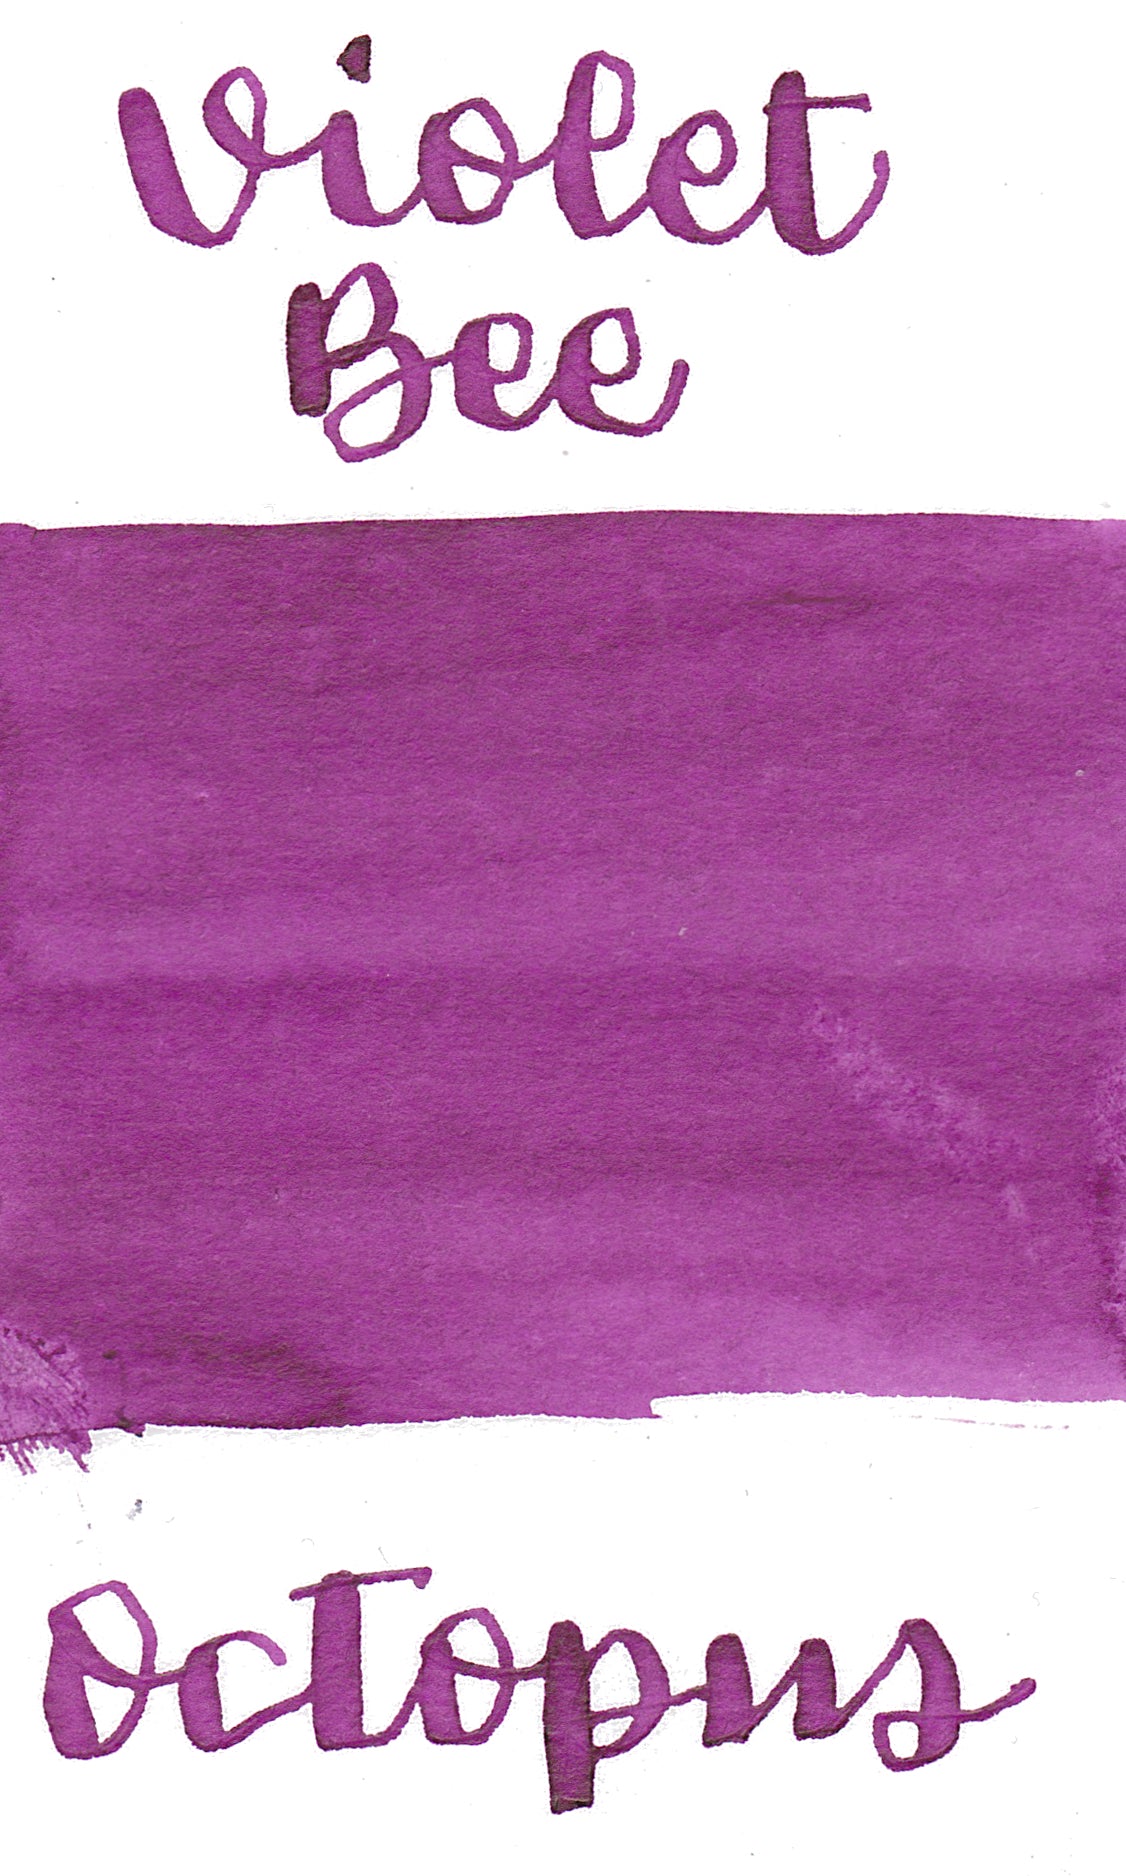 Octopus Write and Draw Ink 401 Violet Bee